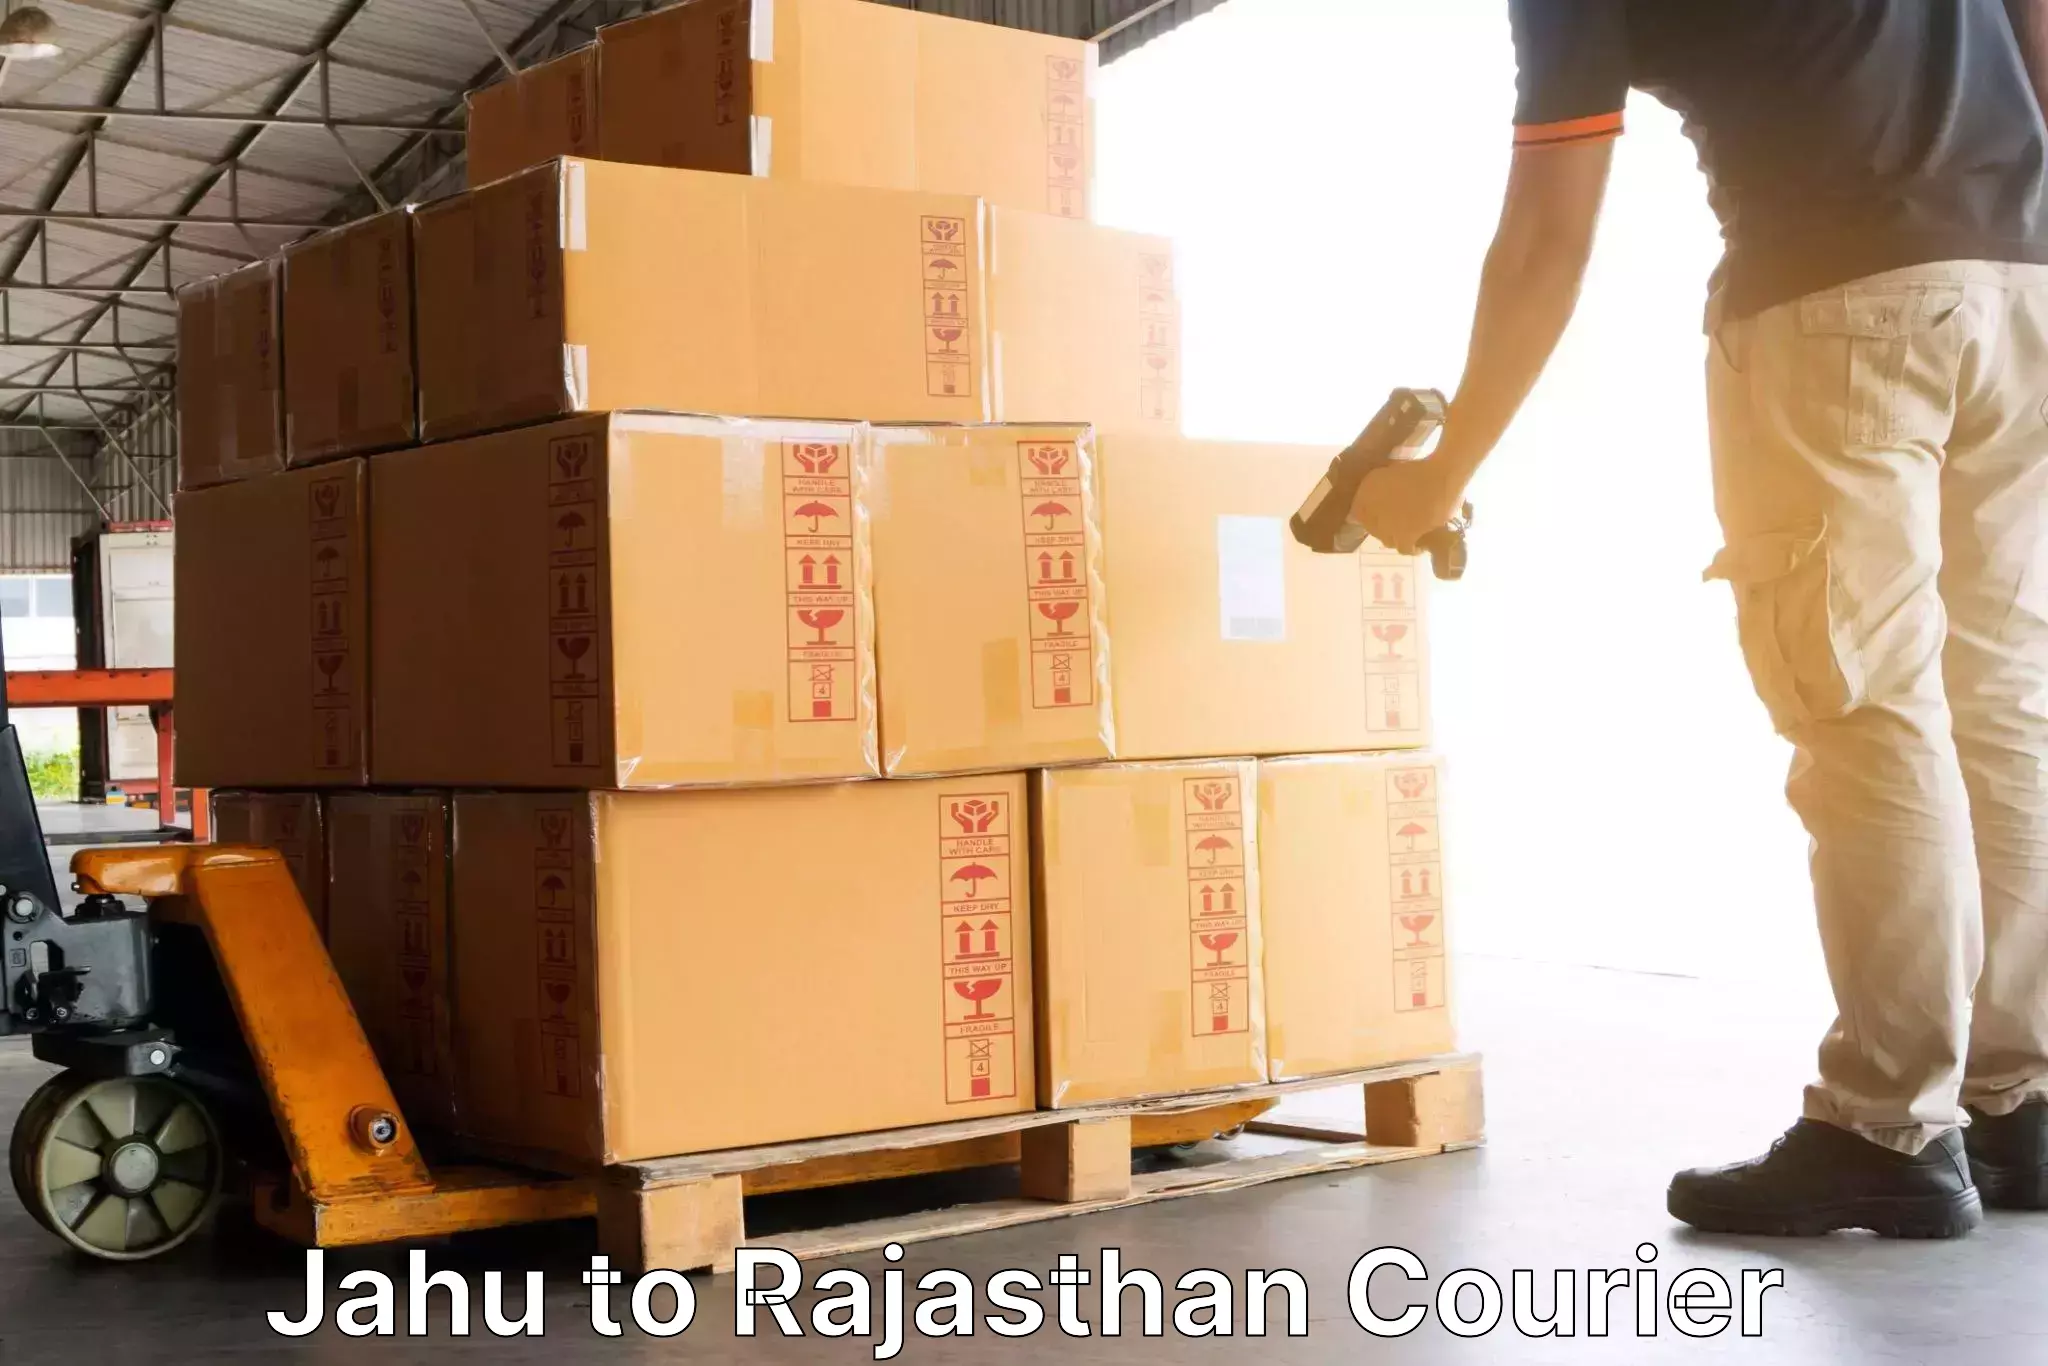 Courier service efficiency Jahu to Rajasthan